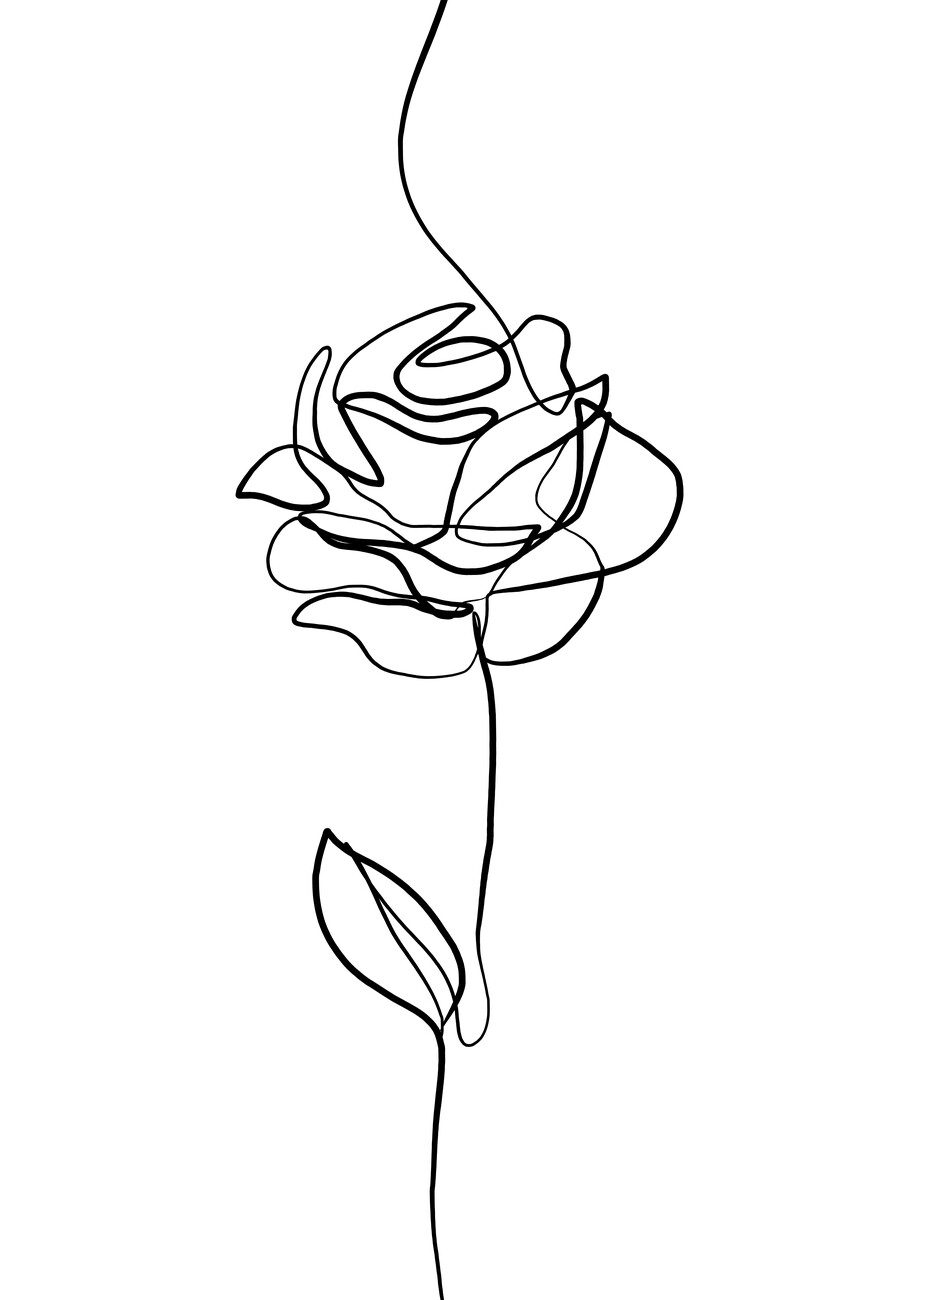 Black Rose - Black And White Flower - CleanPNG / KissPNG